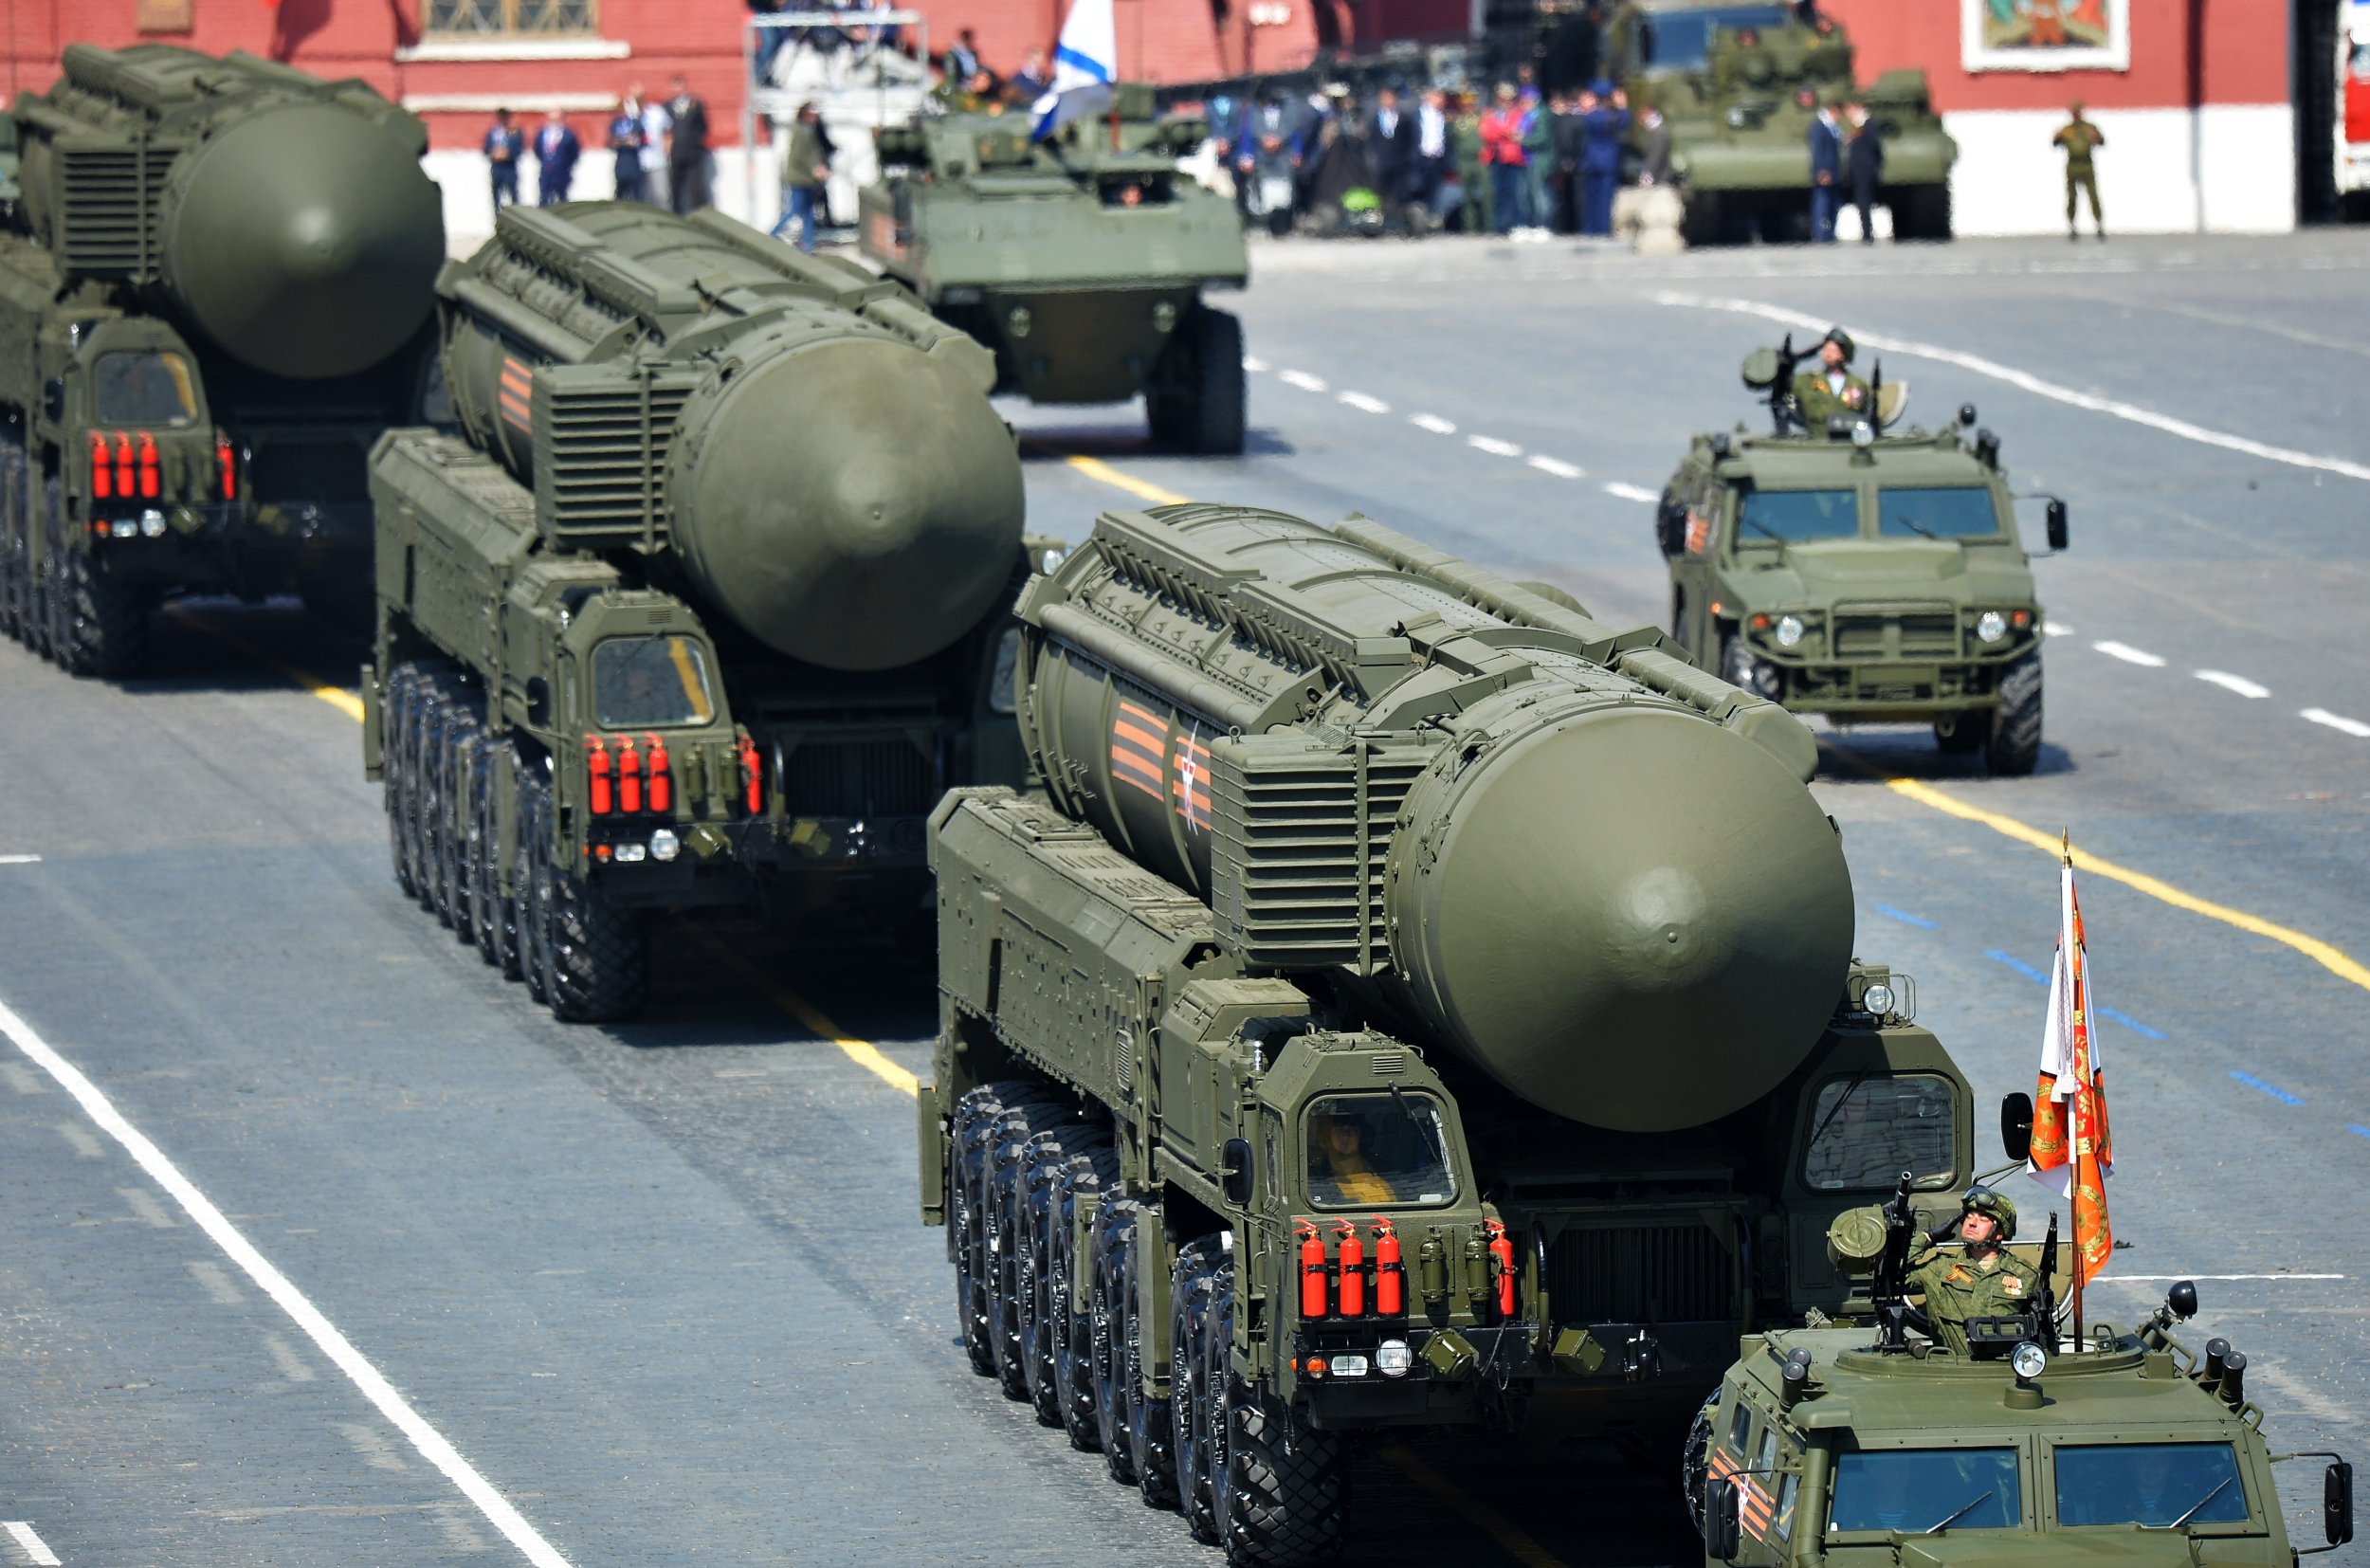 Satan 2 Russia Is About to Test Its New 'Invincible' Nuclear Missile